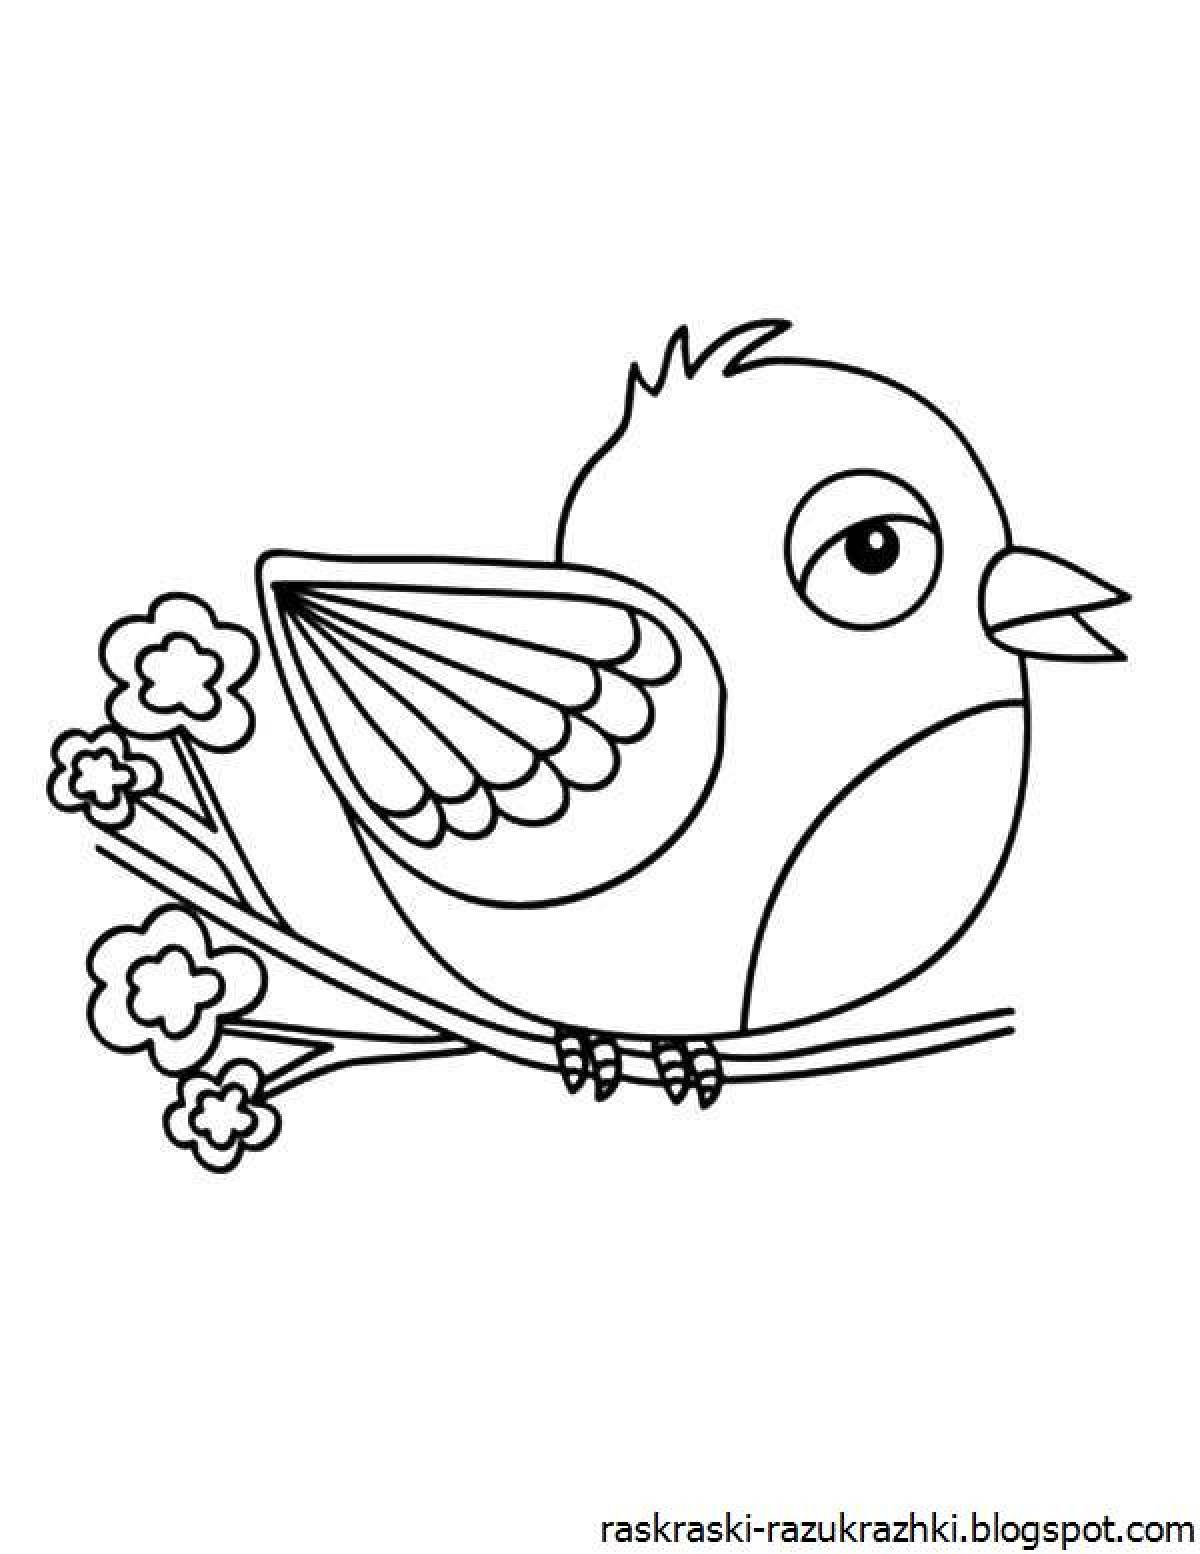 Exquisite bird coloring book for kids